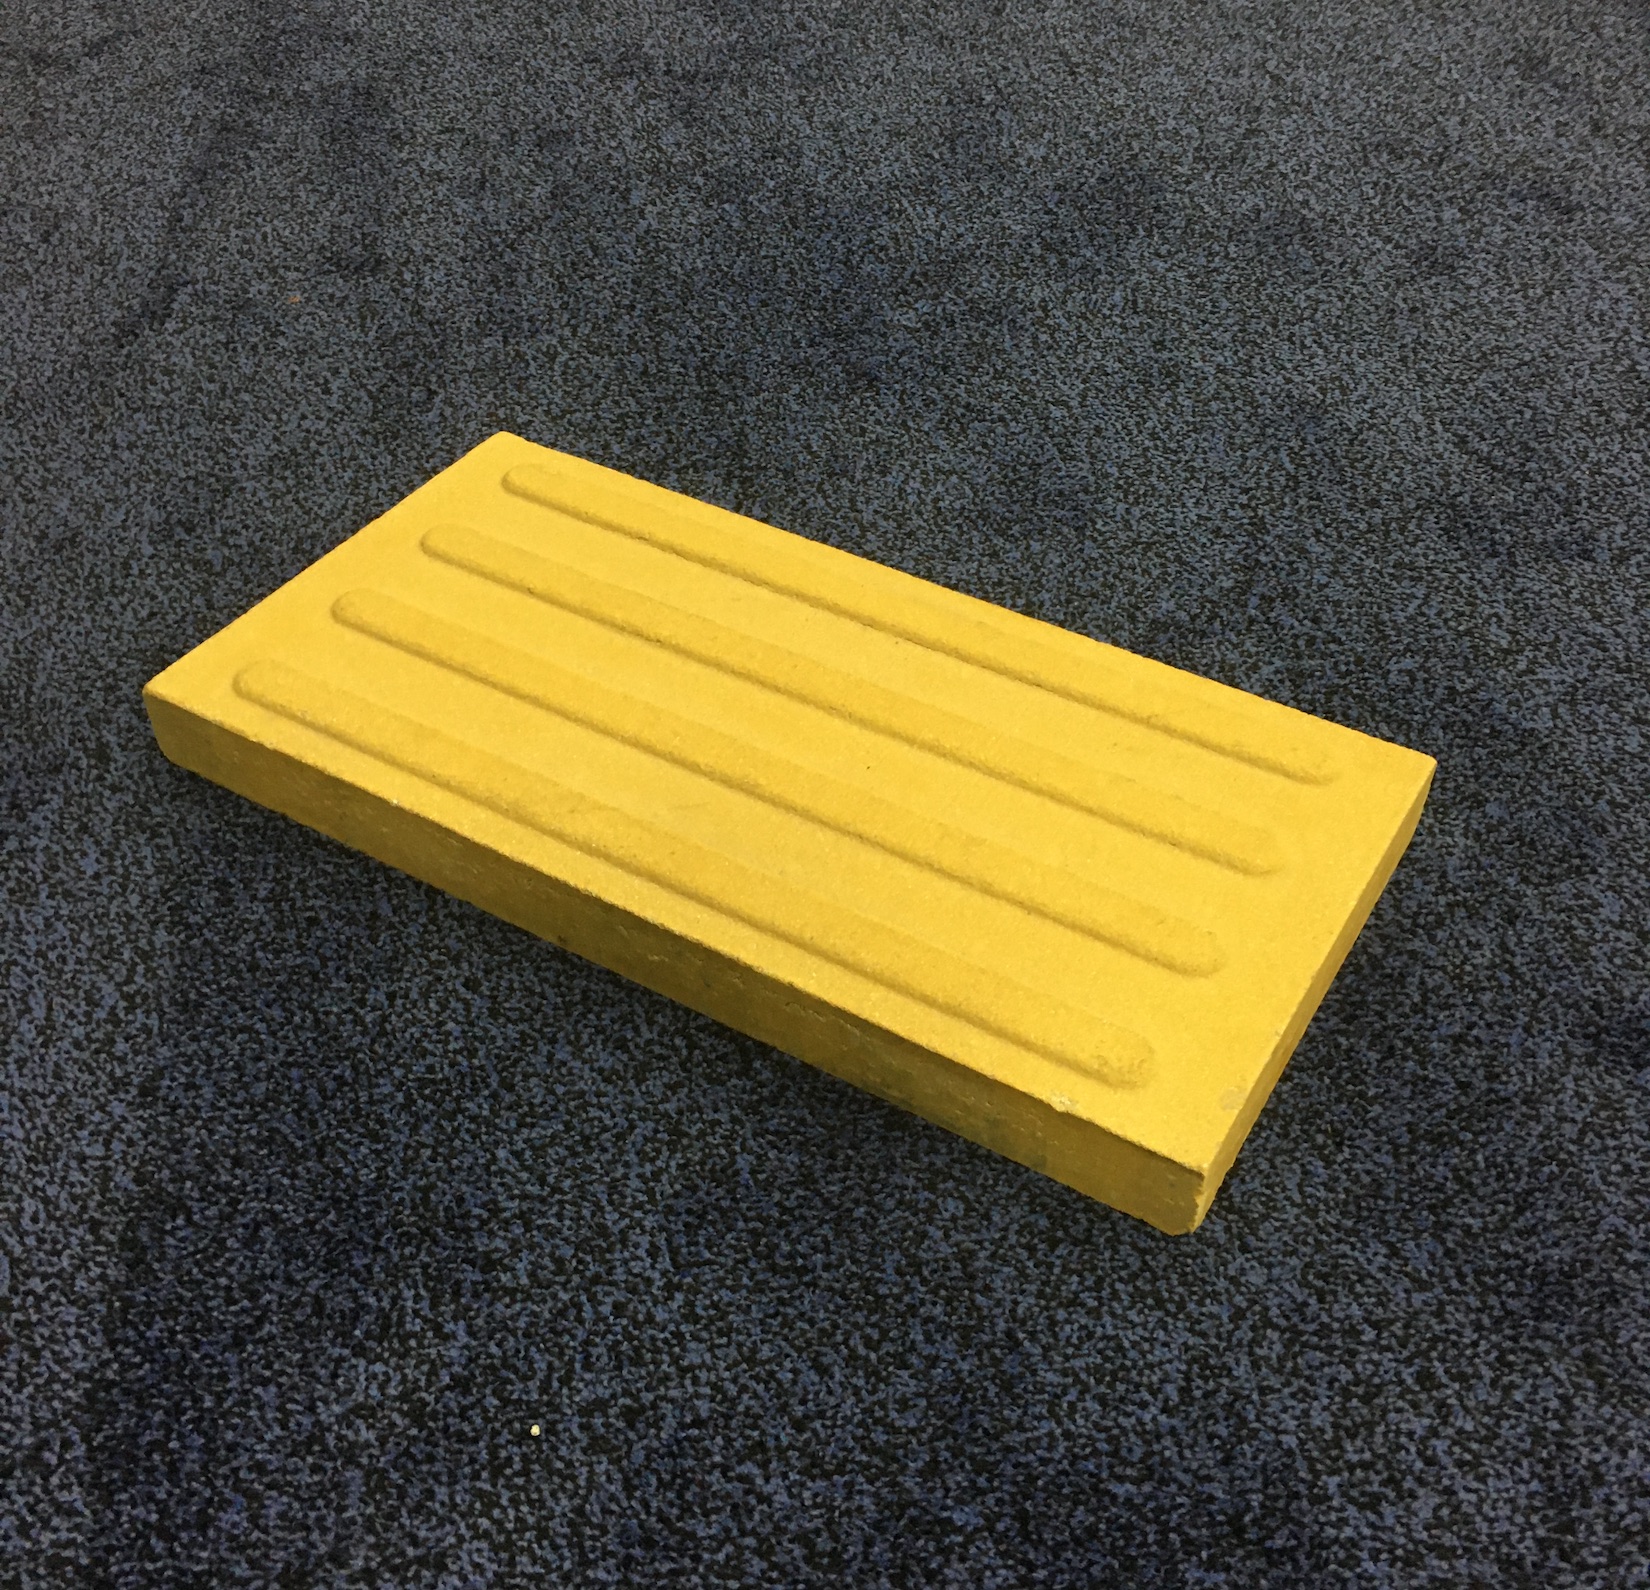 Product Image Test - Directional Paver